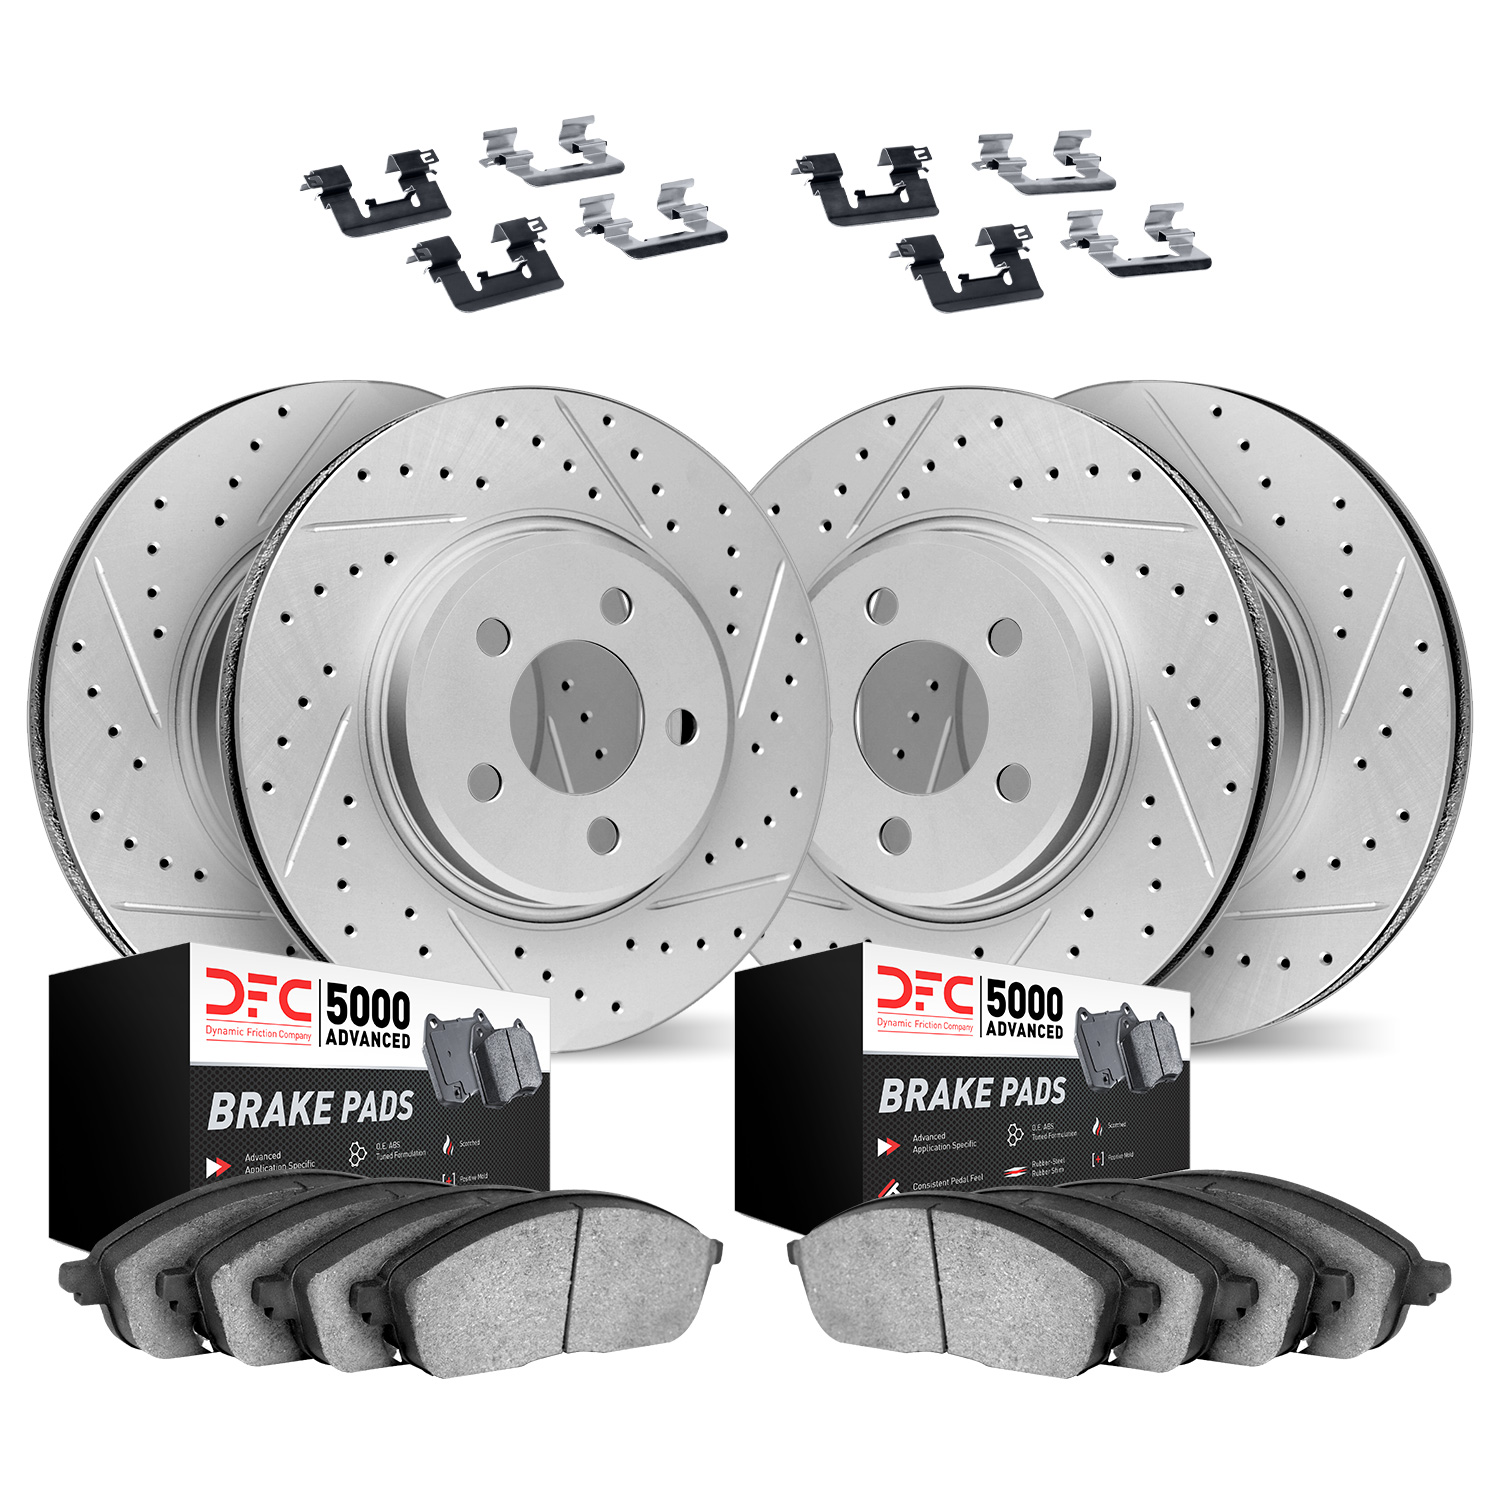 2514-46014 Geoperformance Drilled/Slotted Rotors w/5000 Advanced Brake Pads Kit & Hardware, 2005-2008 GM, Position: Front and Re